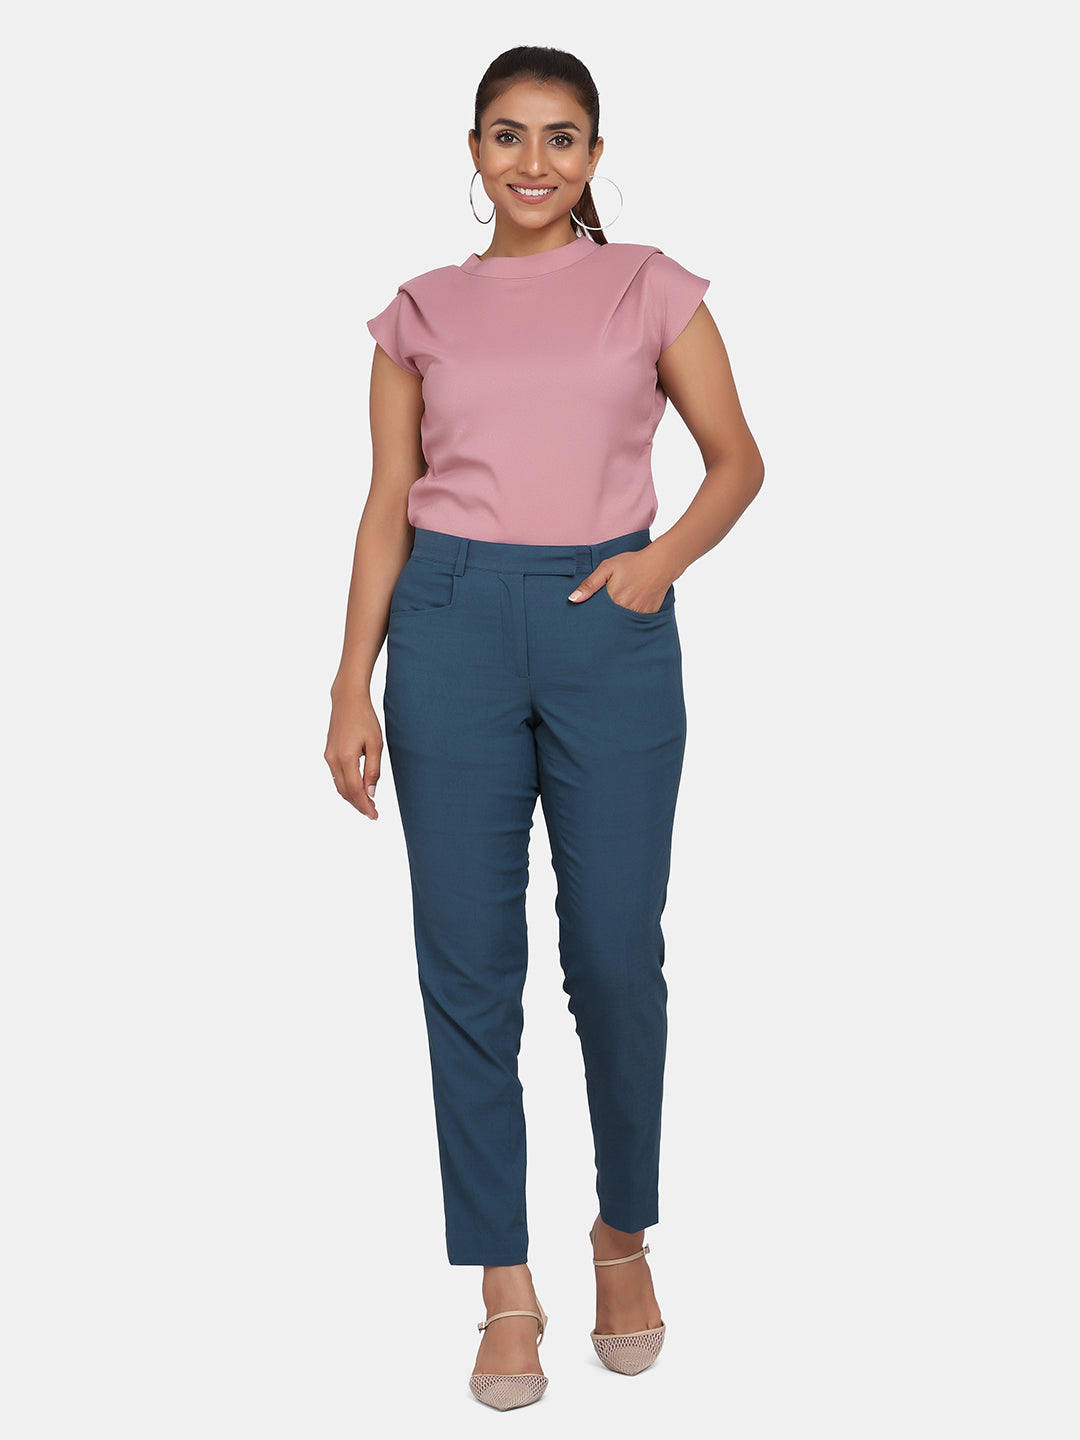 Toko Twill Formal Trousers for Women- Teal Blue